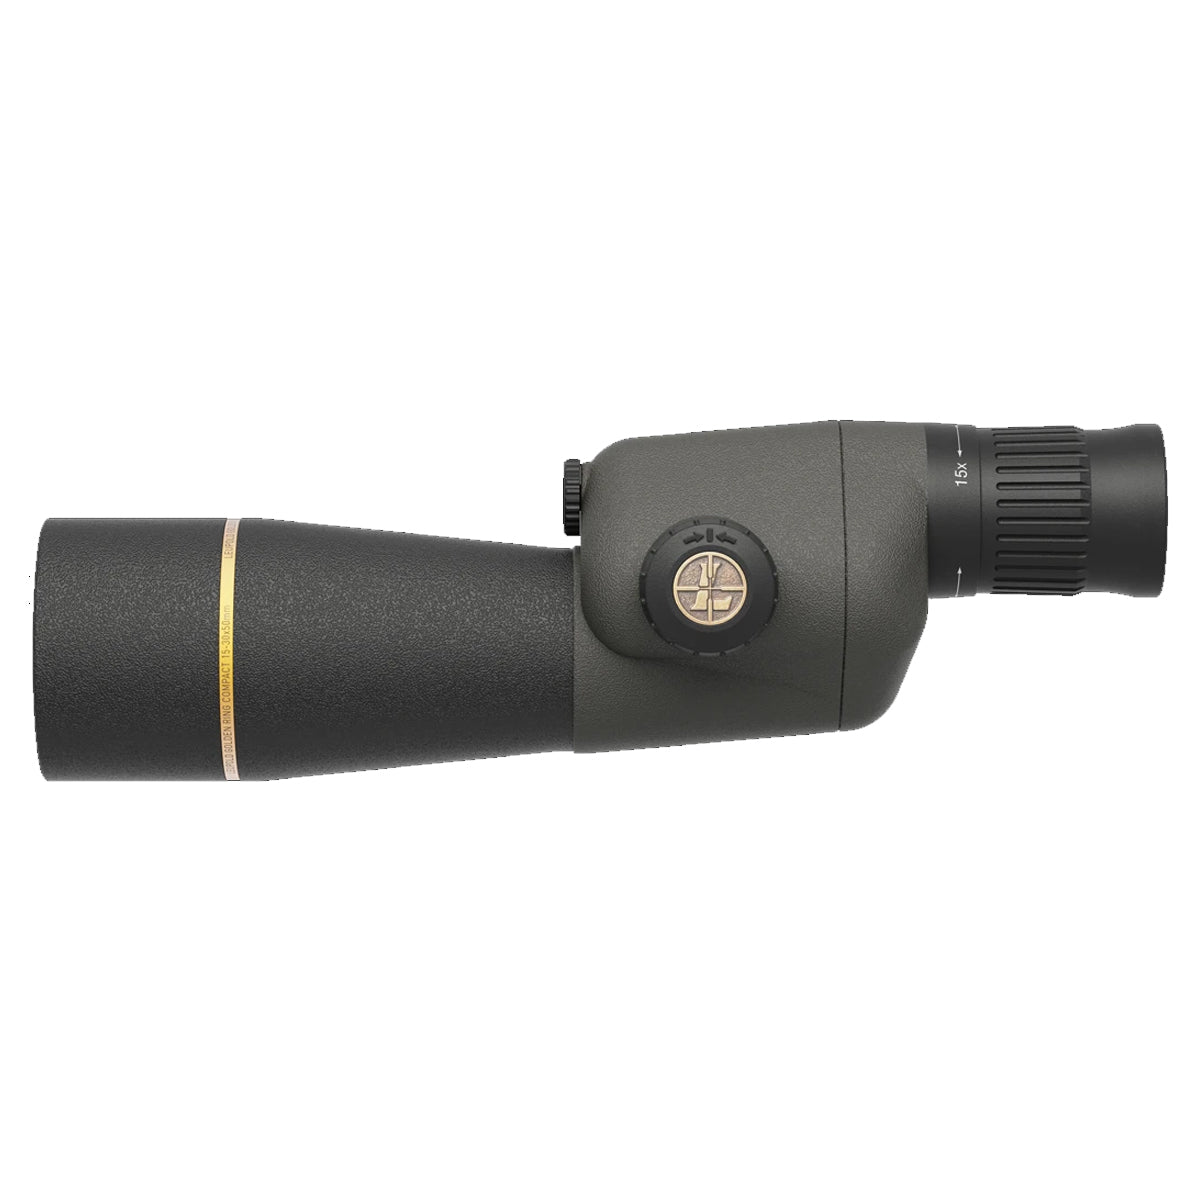 Leupold Gold Ring 15-30x50mm Compact Spotting Scope #120375